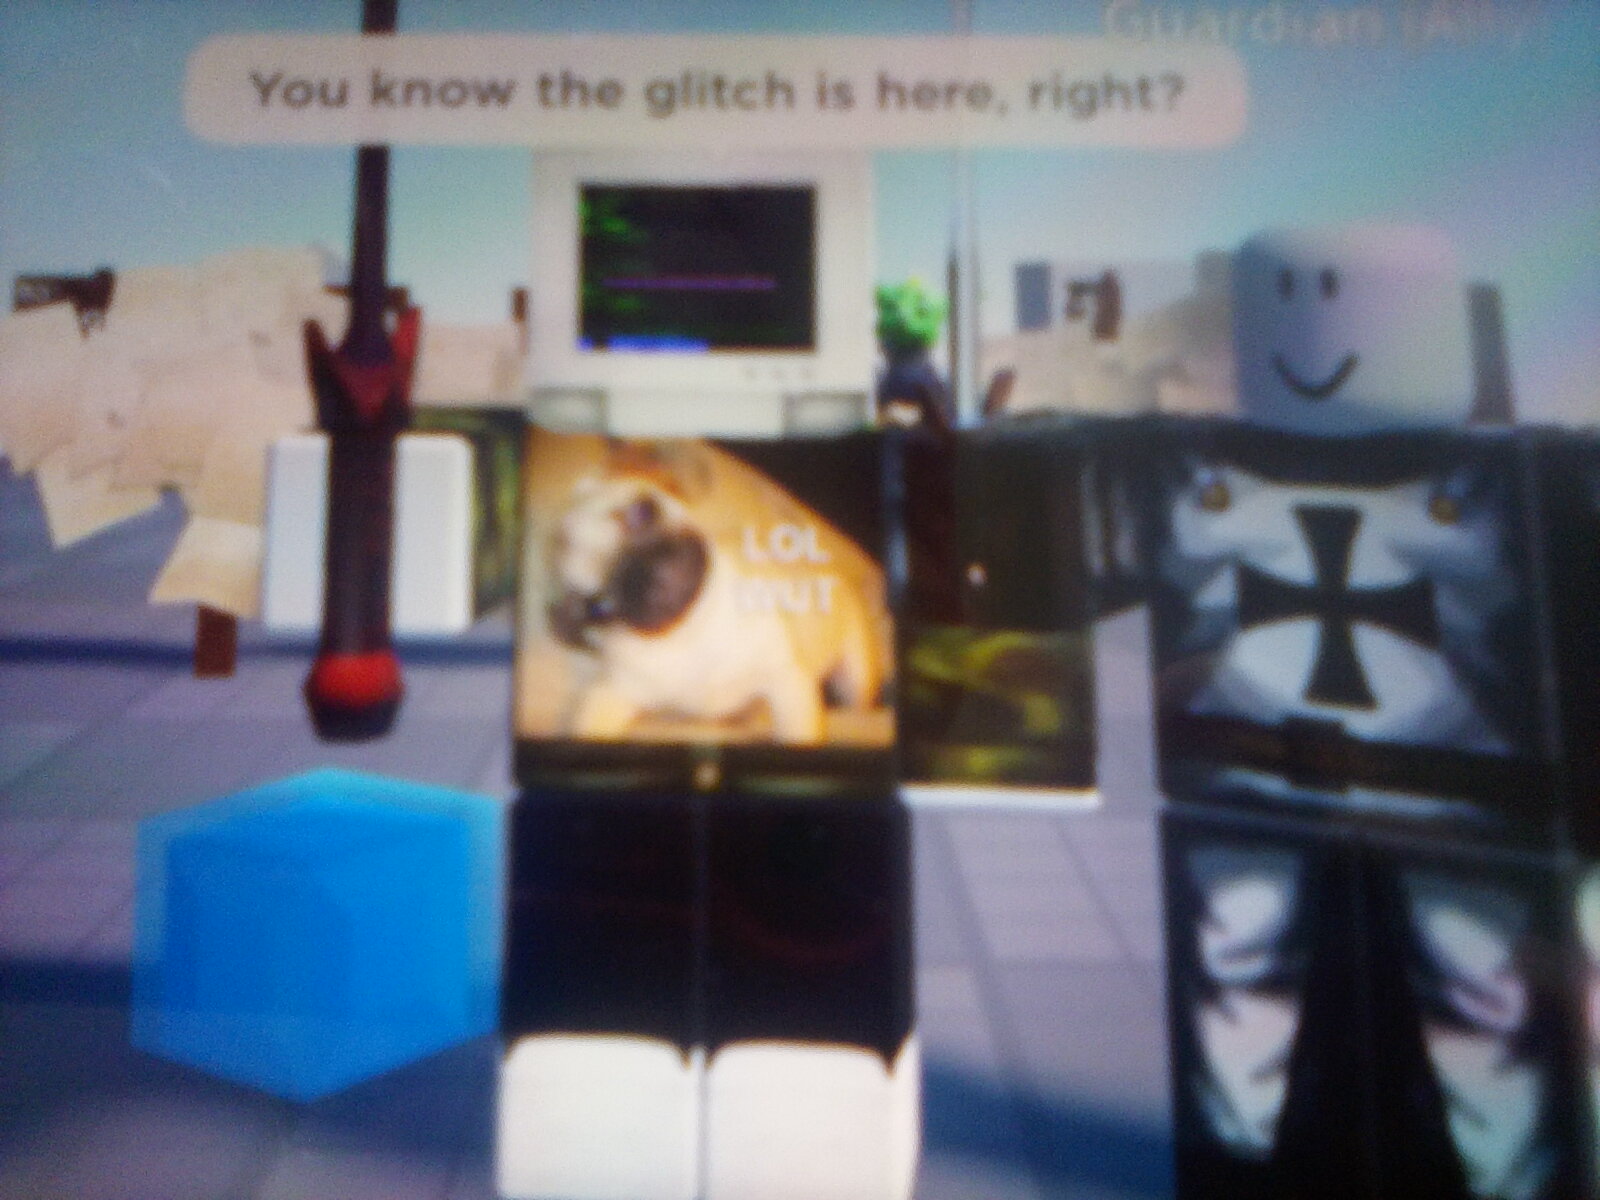 Pugdogwoof22 "You know the glitch is here, right?" Blank Meme Template